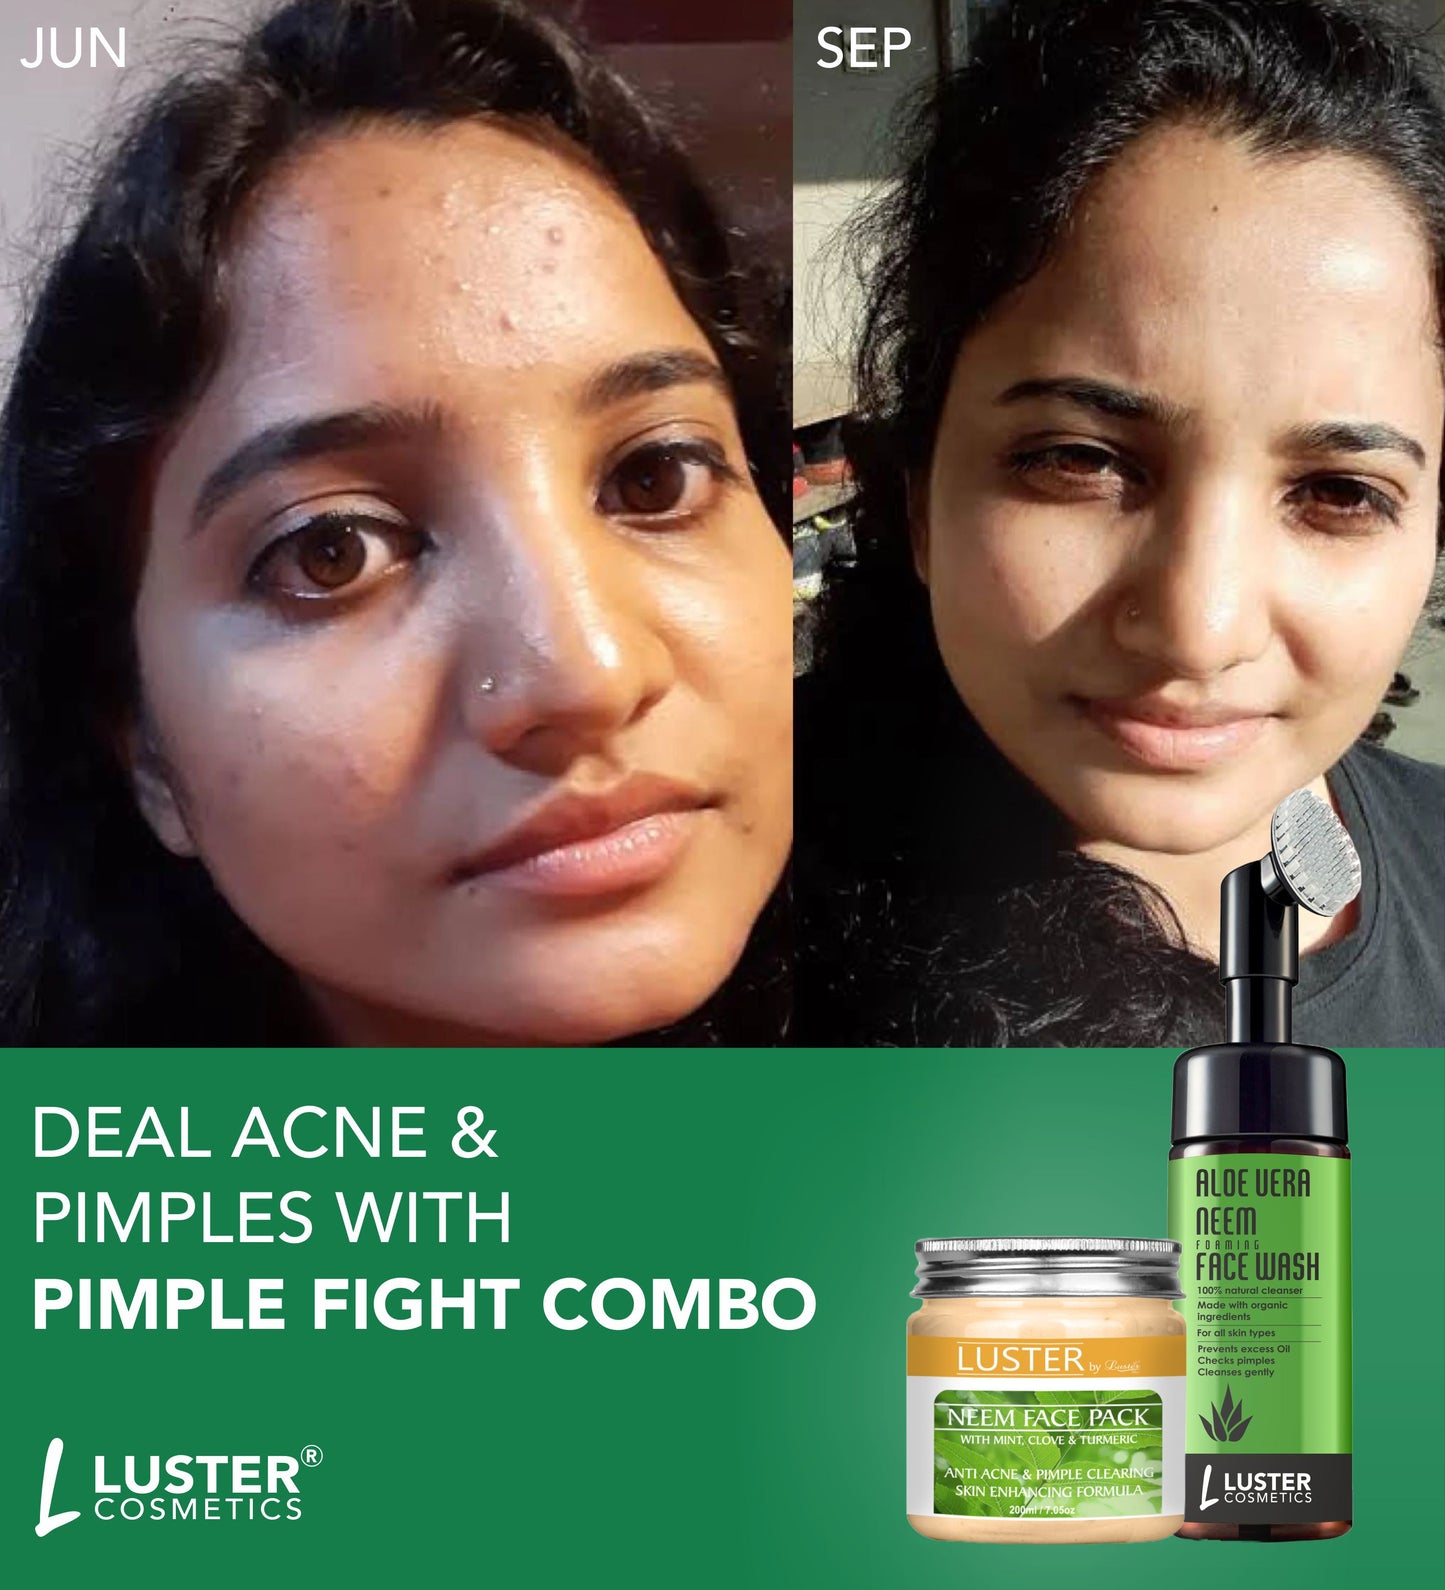 Luster Pimple Fight Combo – Neem Face Pack & Aloe Vera Foaming Face Wash